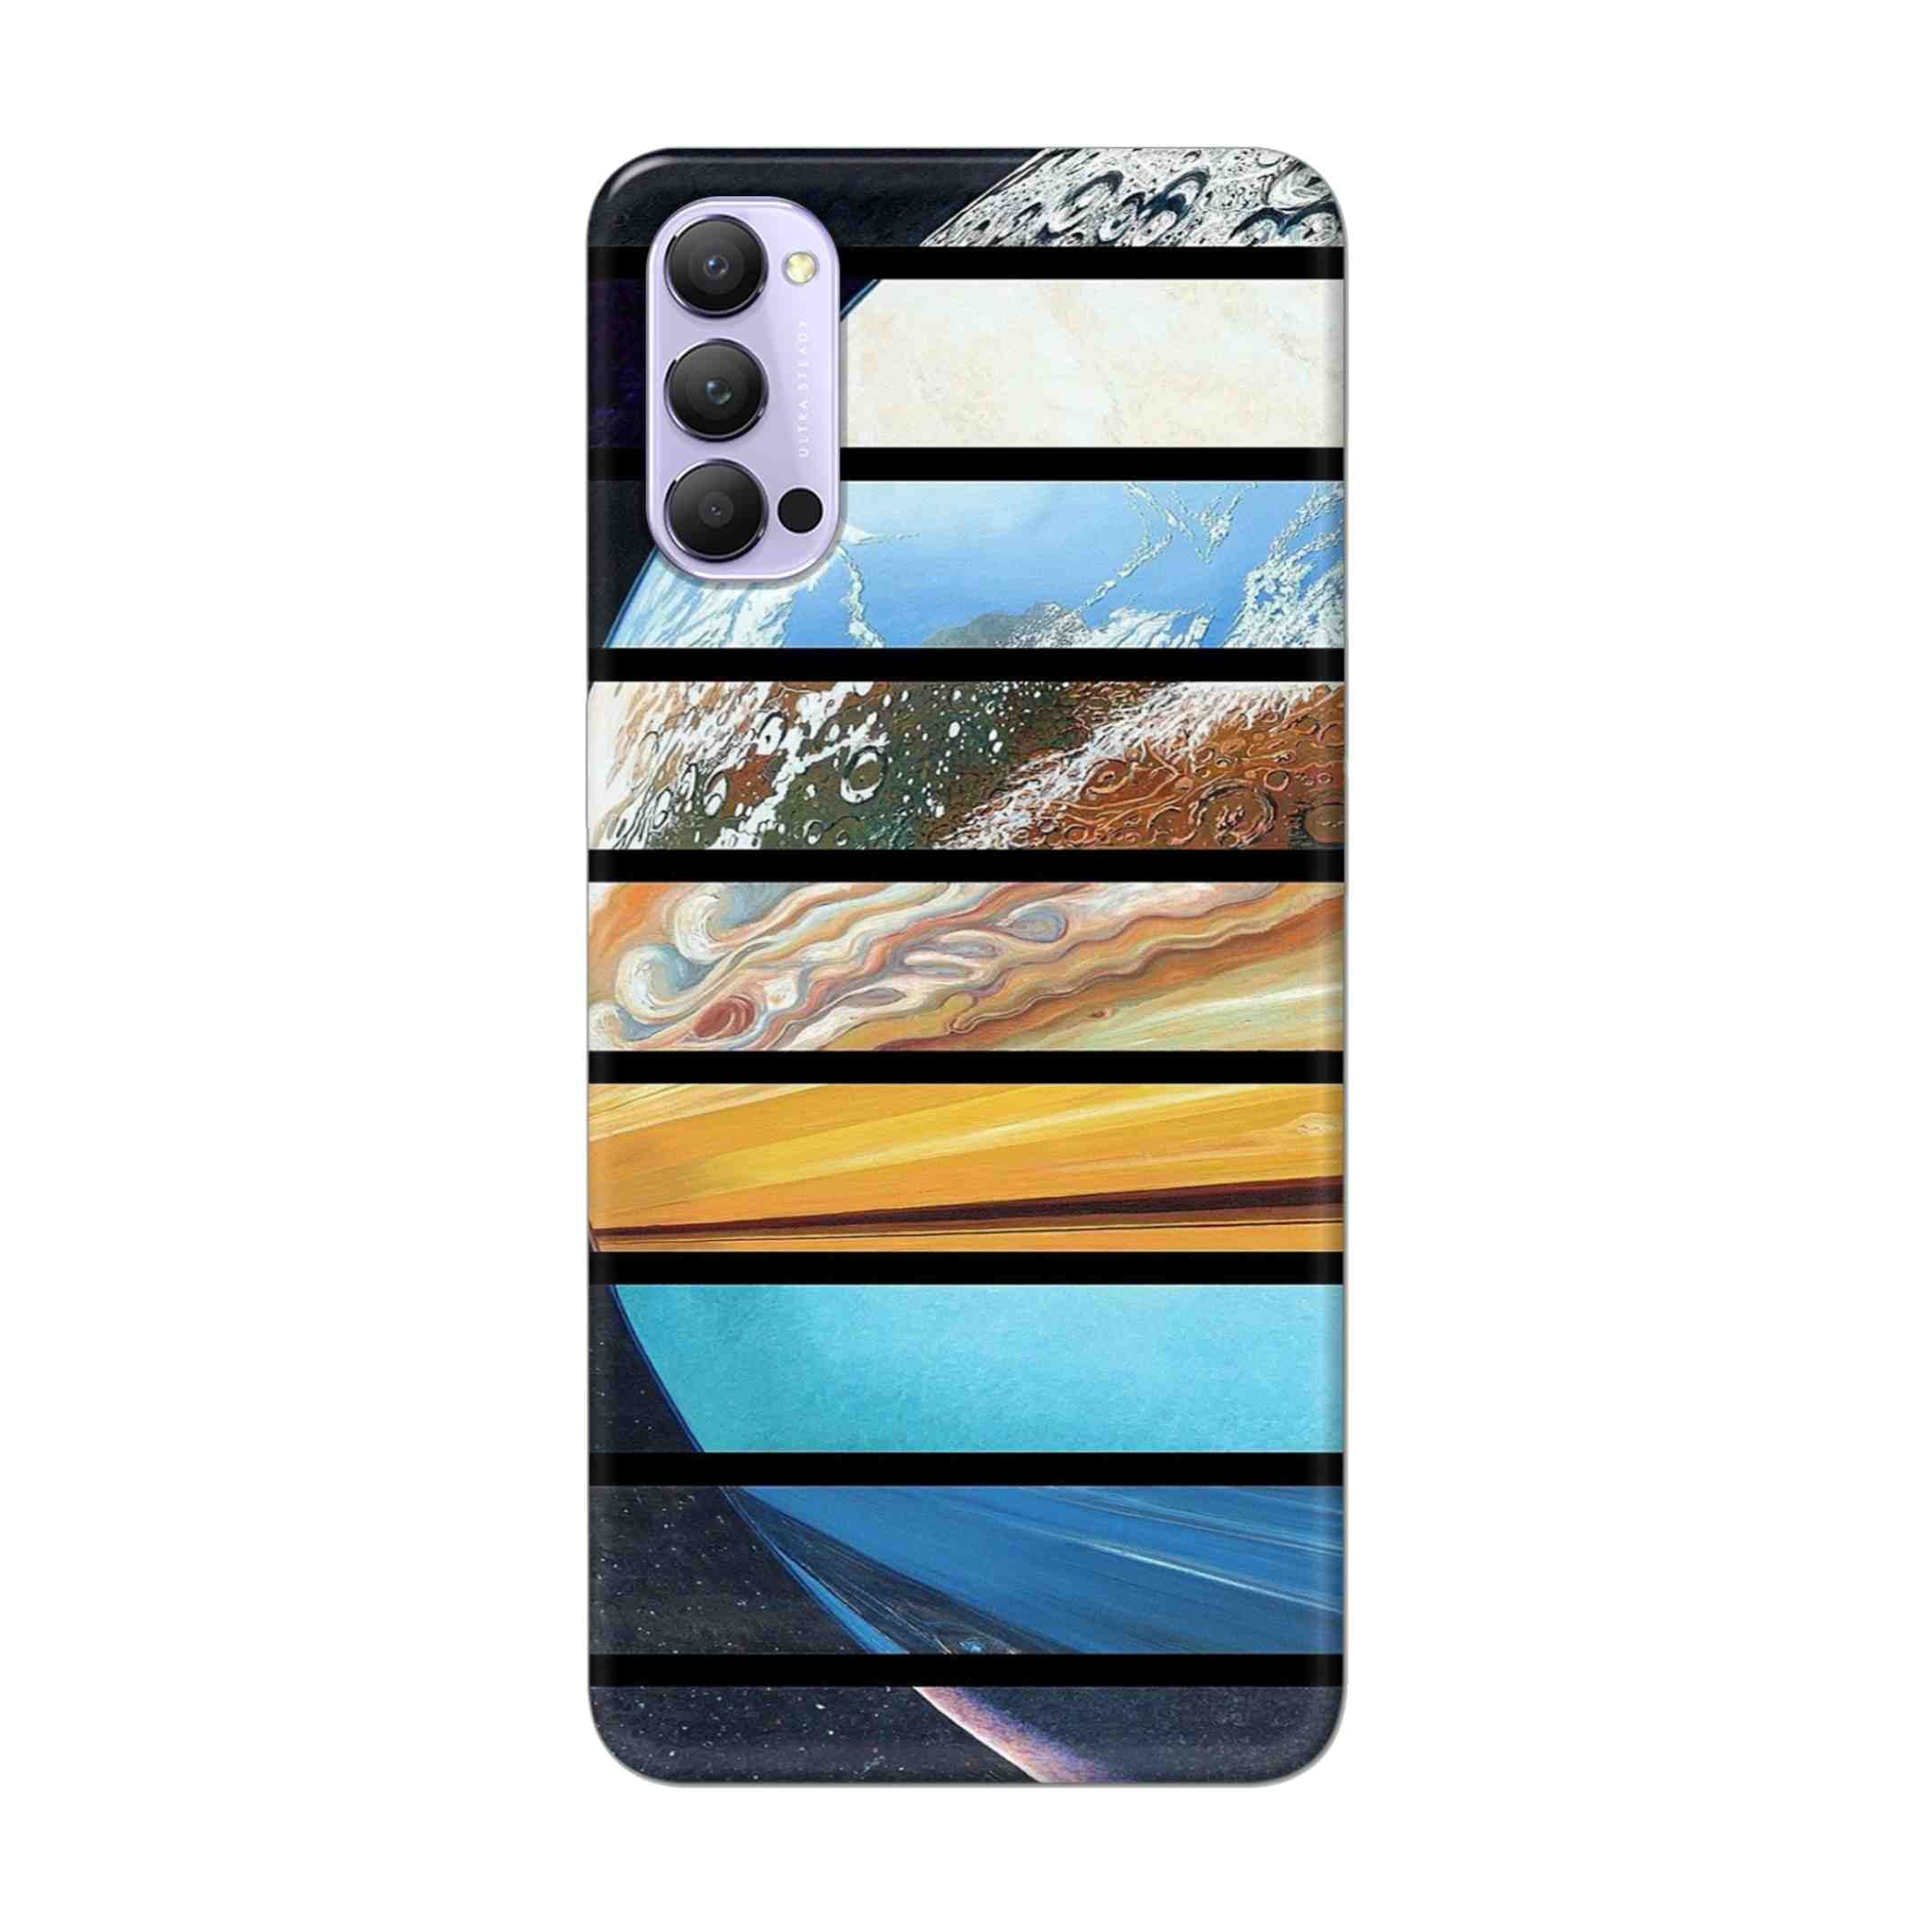 Buy Colourful Earth Hard Back Mobile Phone Case Cover For Oppo Reno 4 Pro Online